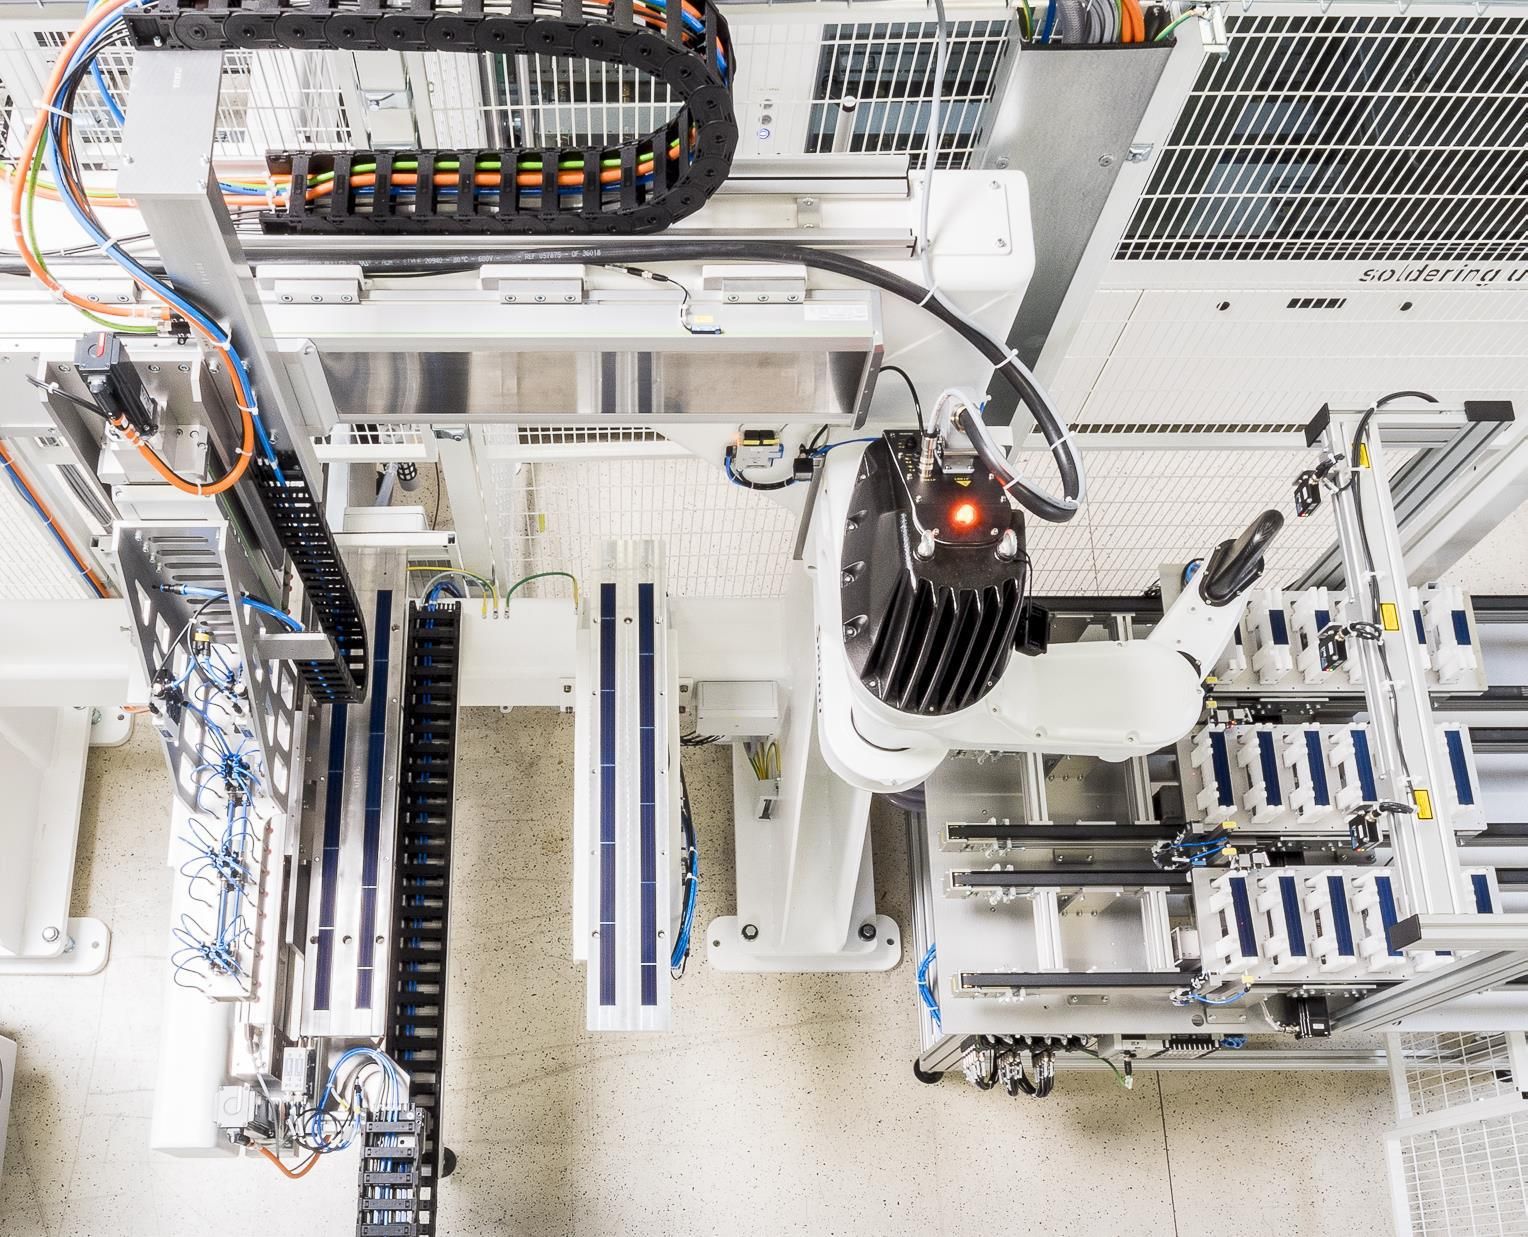 The company M10 and Fraunhofer ISE have jointly developed a system for interconnecting cells in matrix shingle modules. A robot arm arranges the shingle cells in a matrix and prepares them for the bonding process.